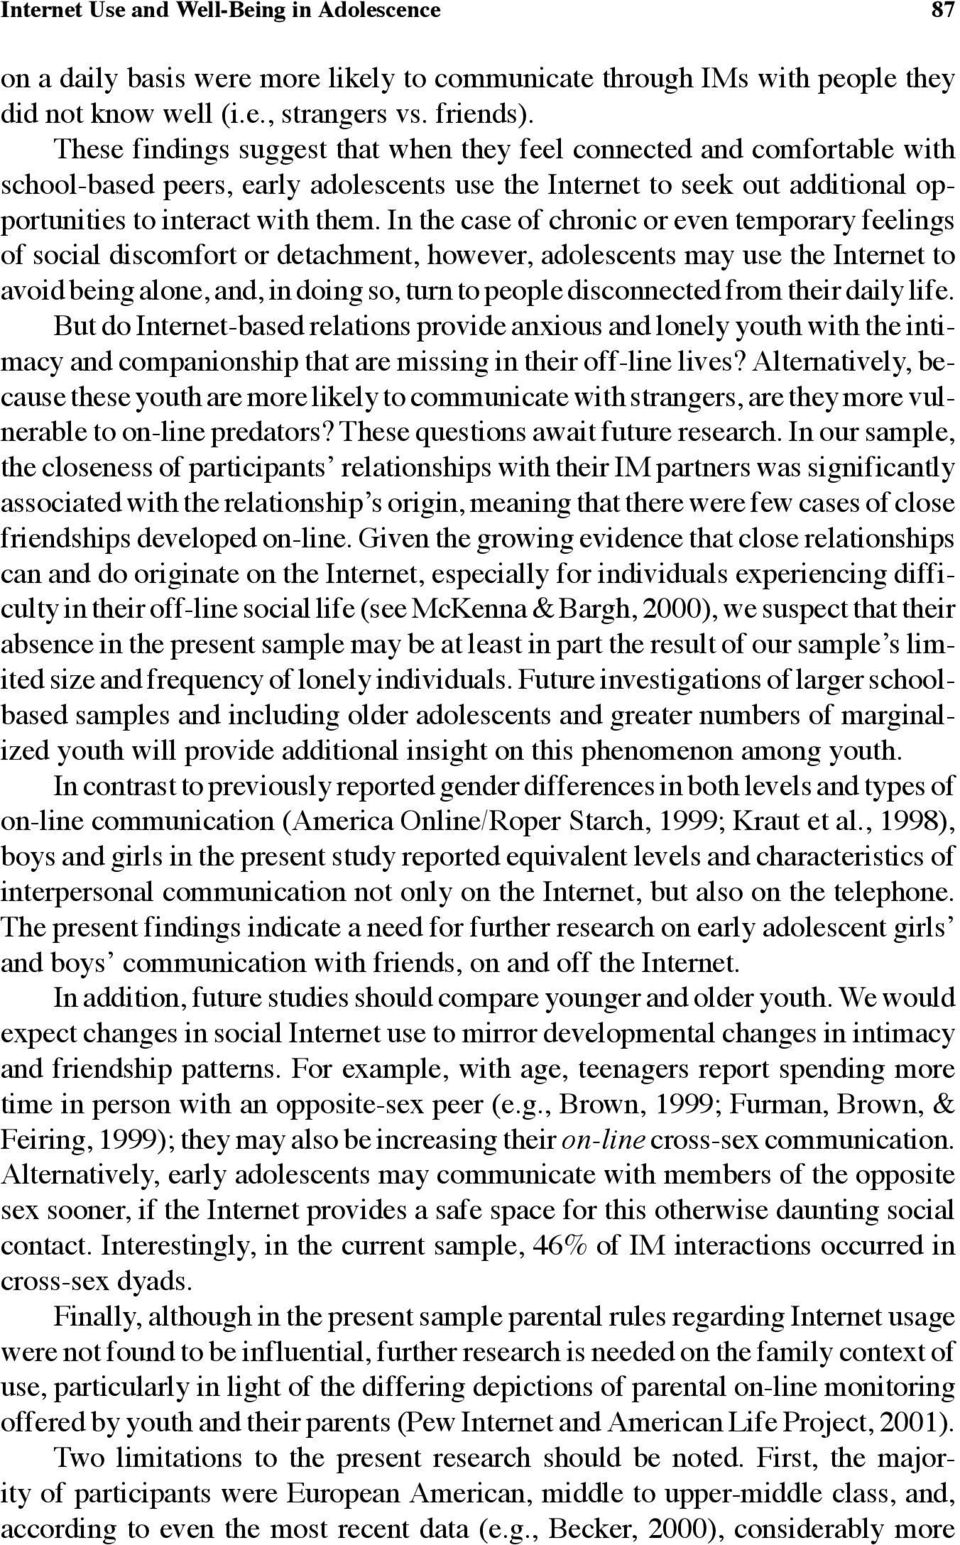 In the case of chronic or even temporary feelings of social discomfort or detachment, however, adolescents may use the Internet to avoid being alone, and, in doing so, turn to people disconnected